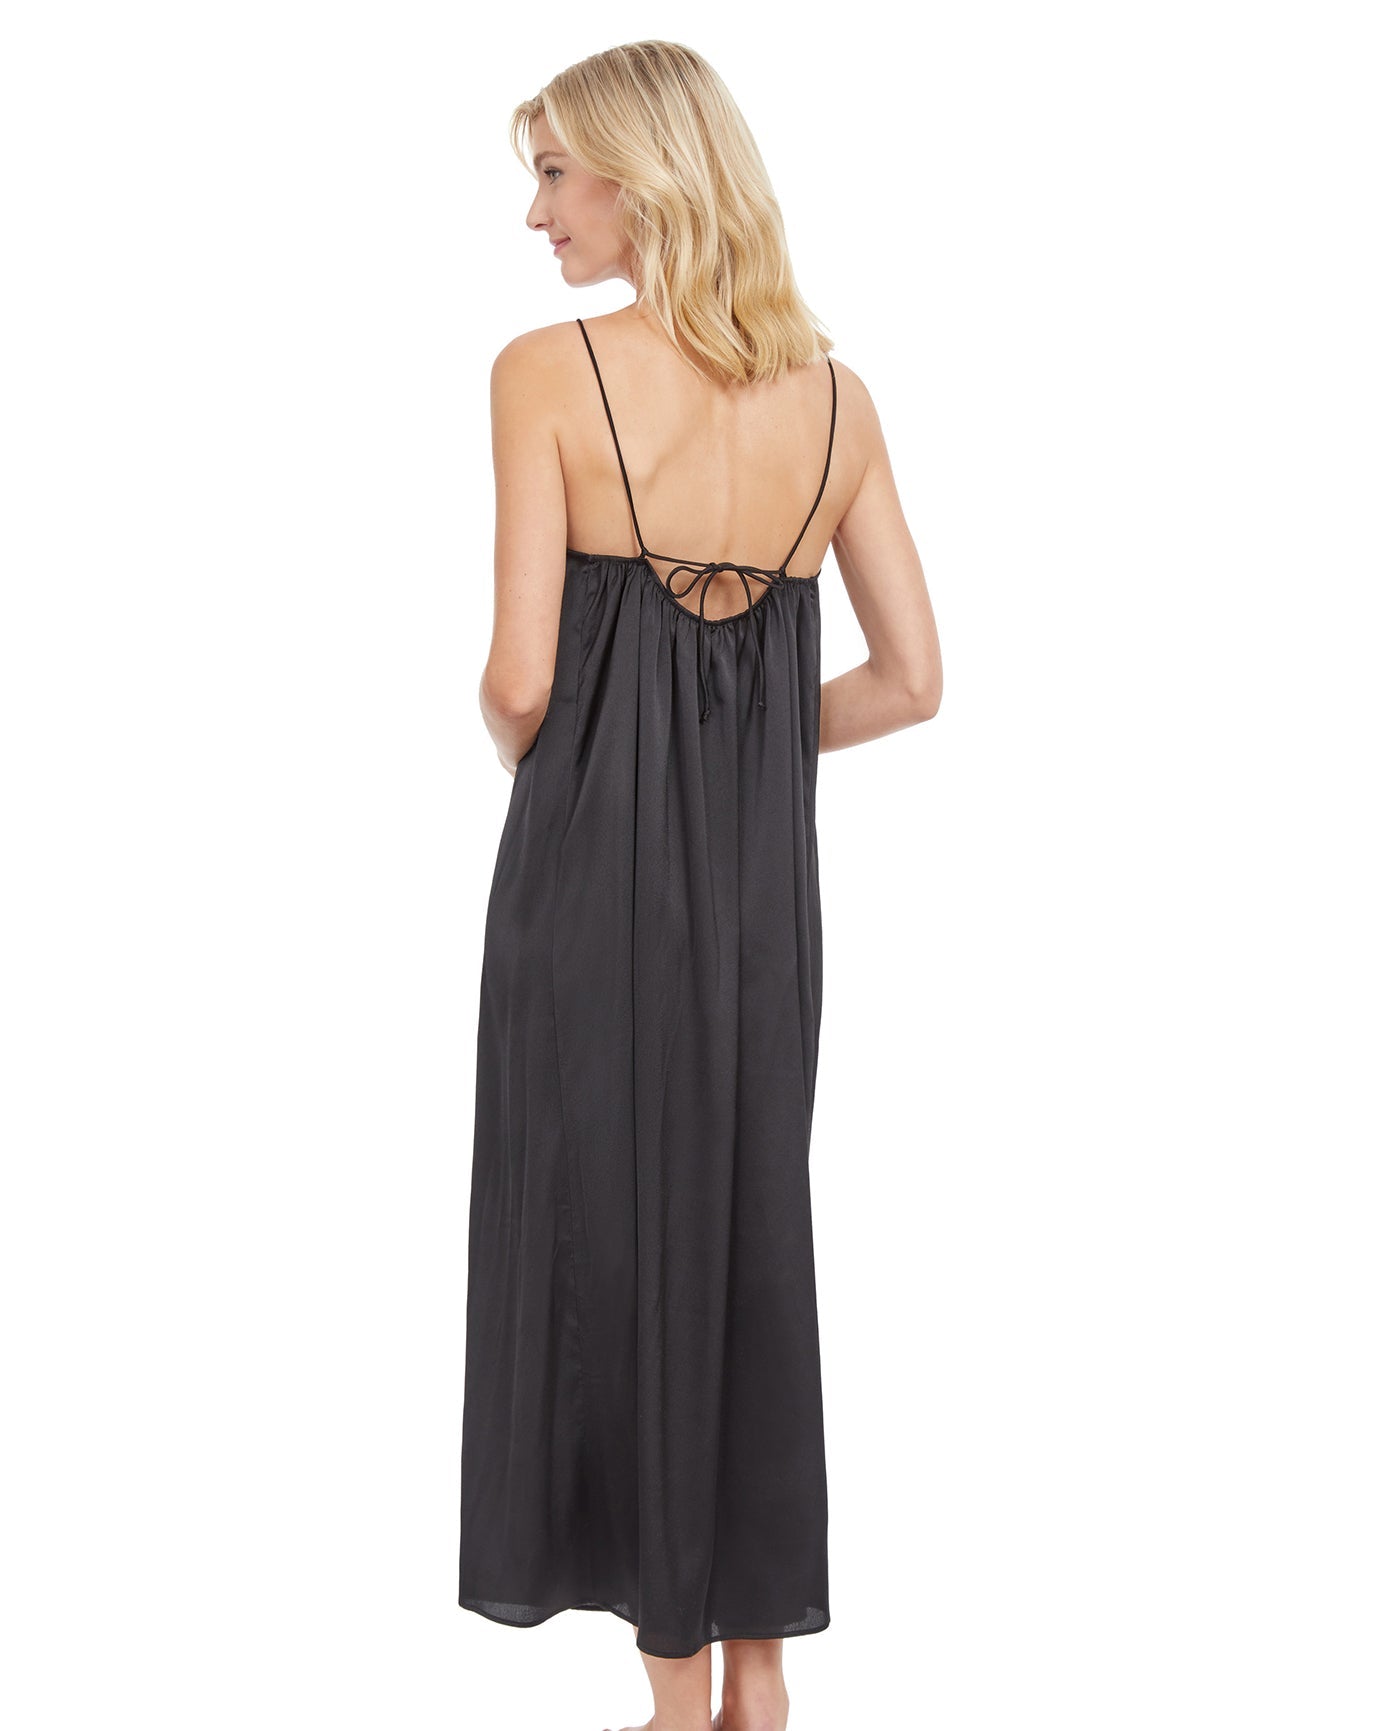 Back View Of Gottex Classic Queen Of Paradise High Neck Long Cover Up Dress | Gottex Queen Of Paradise Black